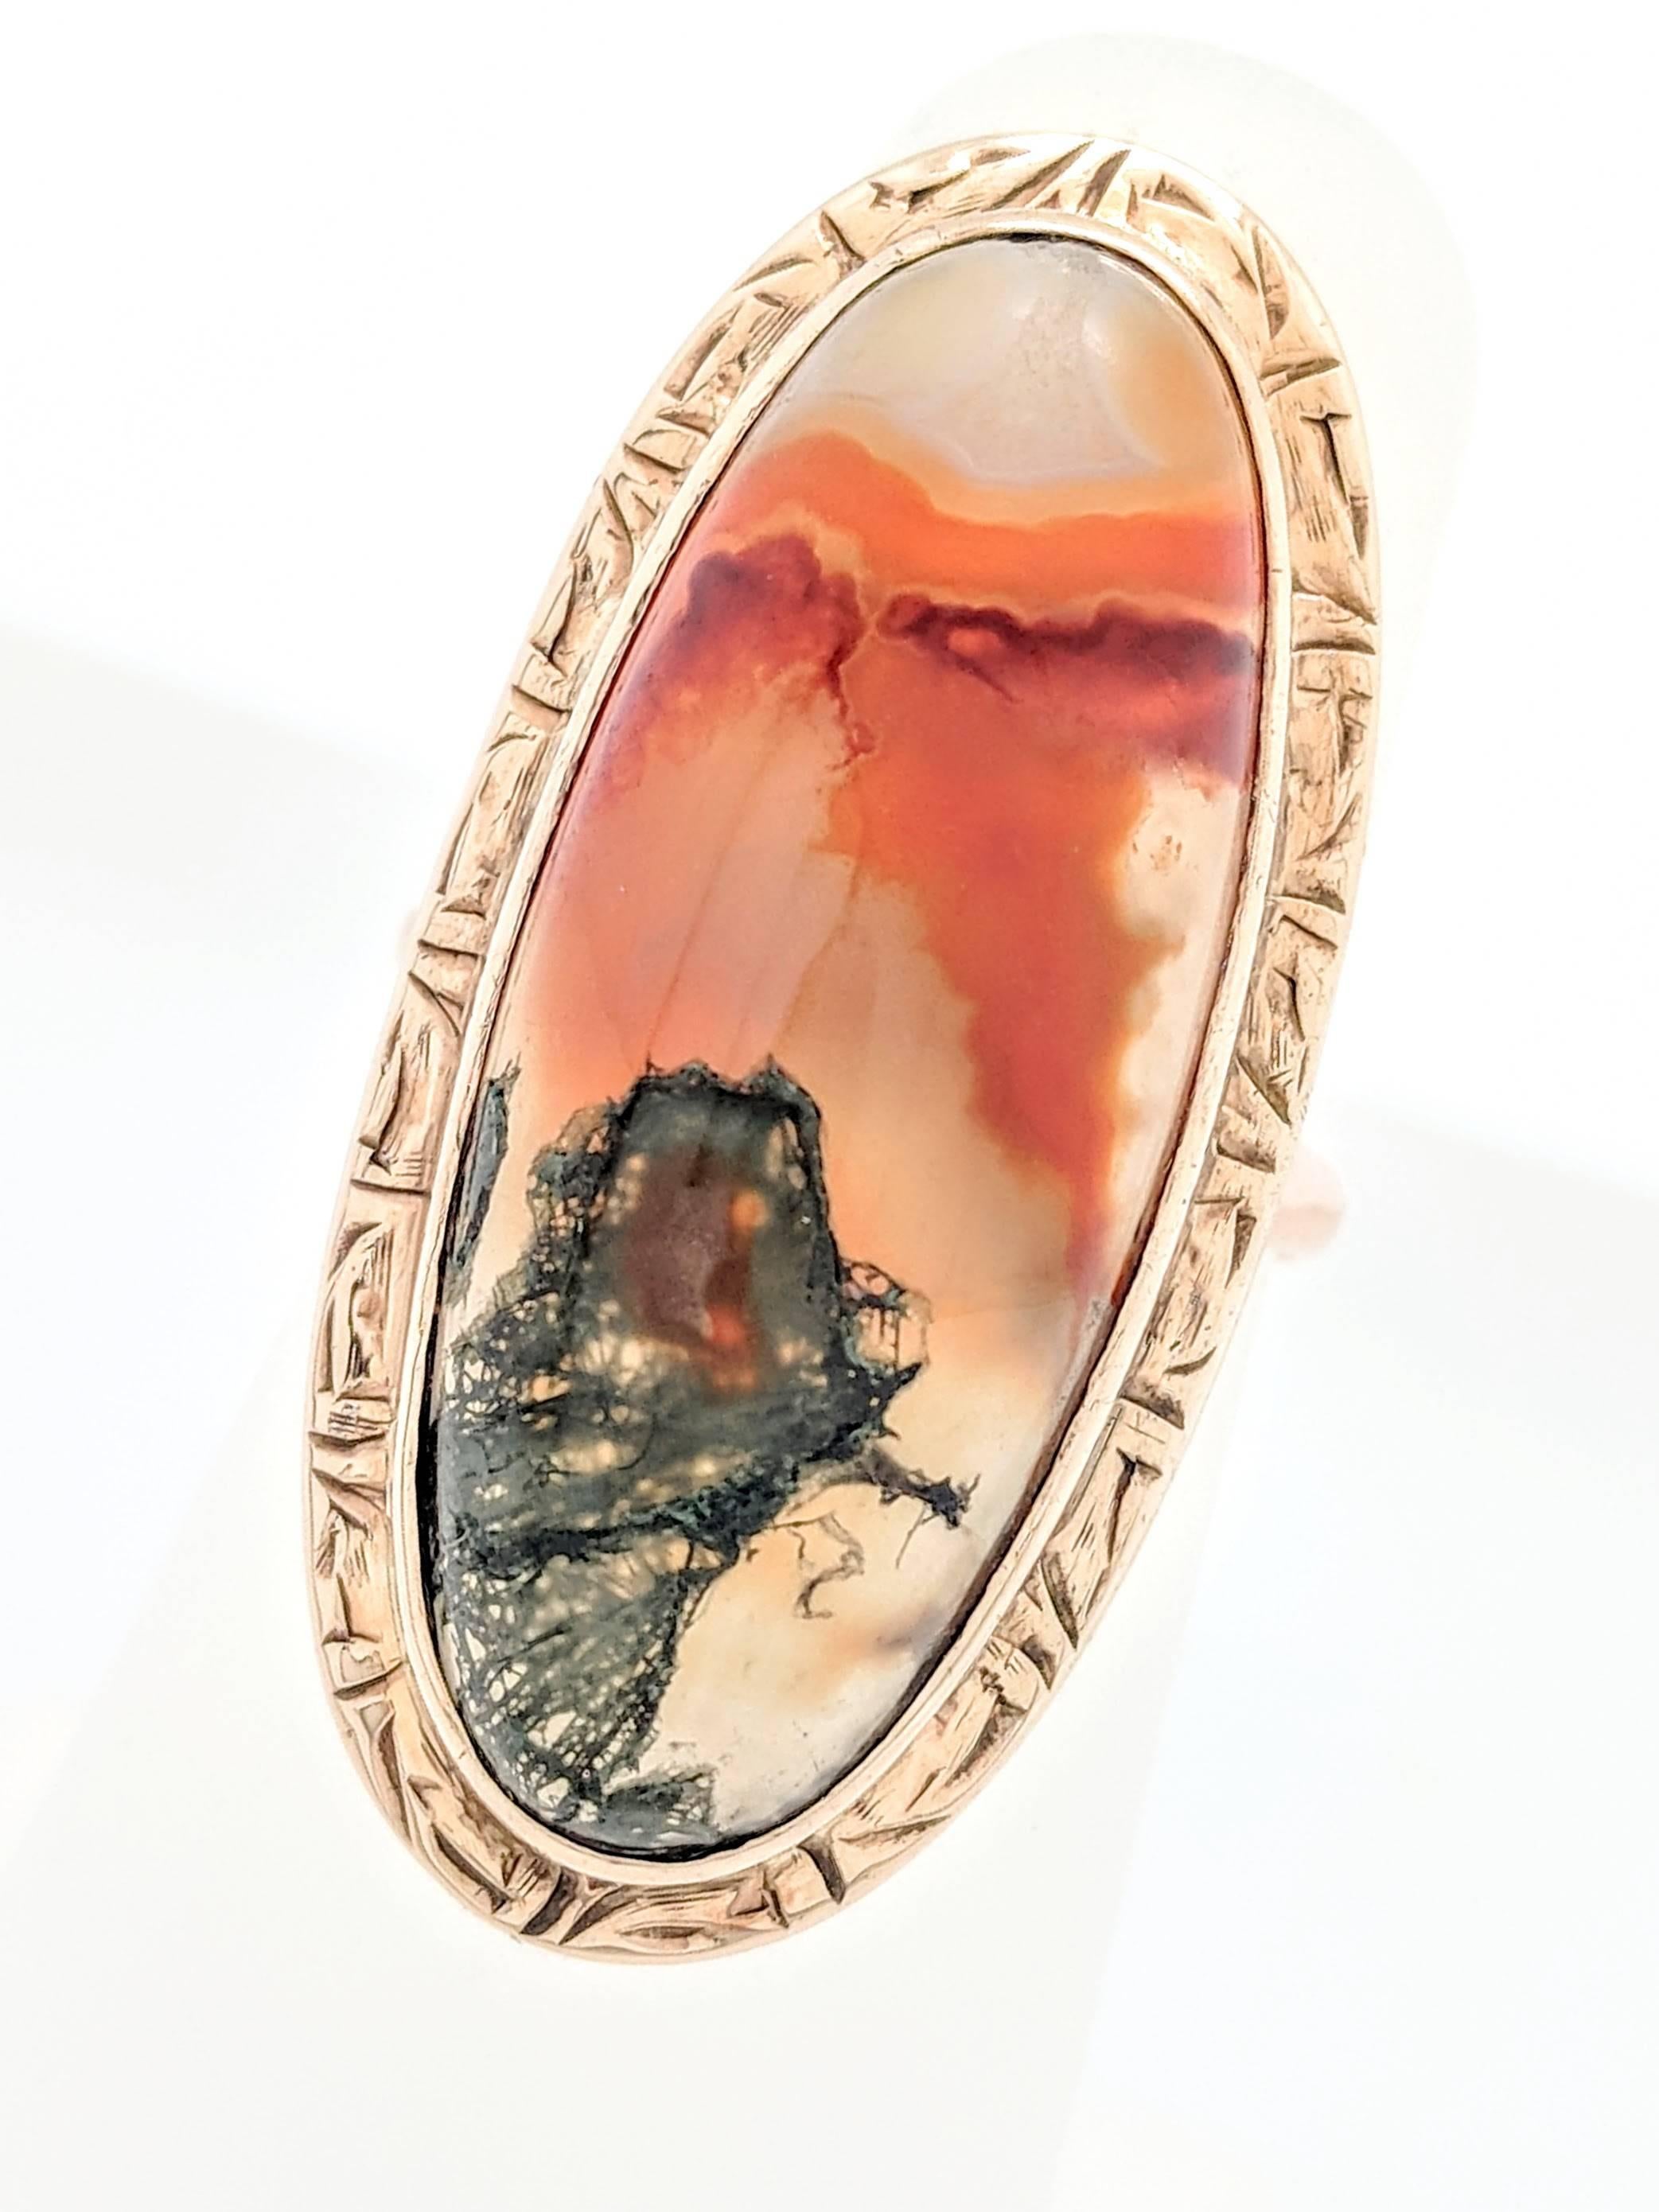 Vintage Ladies 10k Yellow Gold Bandit Agate Ring Size 5 1/2

You are viewing a beautiful bandit agate ring.  This ring is crafted from 10k yellow gold and weighs 6.2 grams.  It features (1) 27mm x 11mm natural oval shaped bandit agate gemstone. This